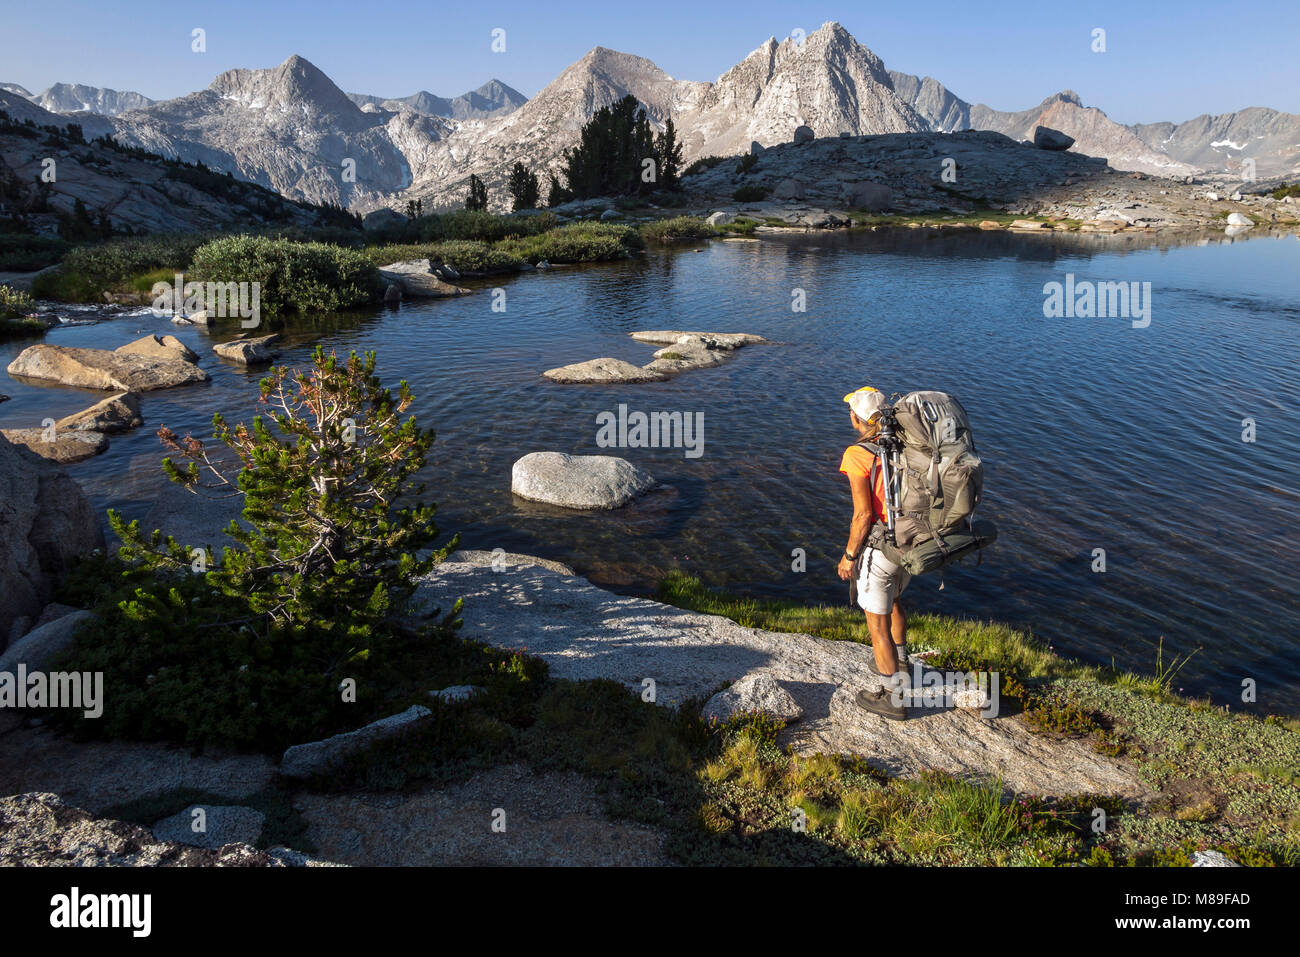 CA03381-00...CALIFORNIA - Vicky Spring backpacking through the Darwin Lakes area along the High Sierra Route, Kings Canyon National Park.  (MR# S1) Stock Photo